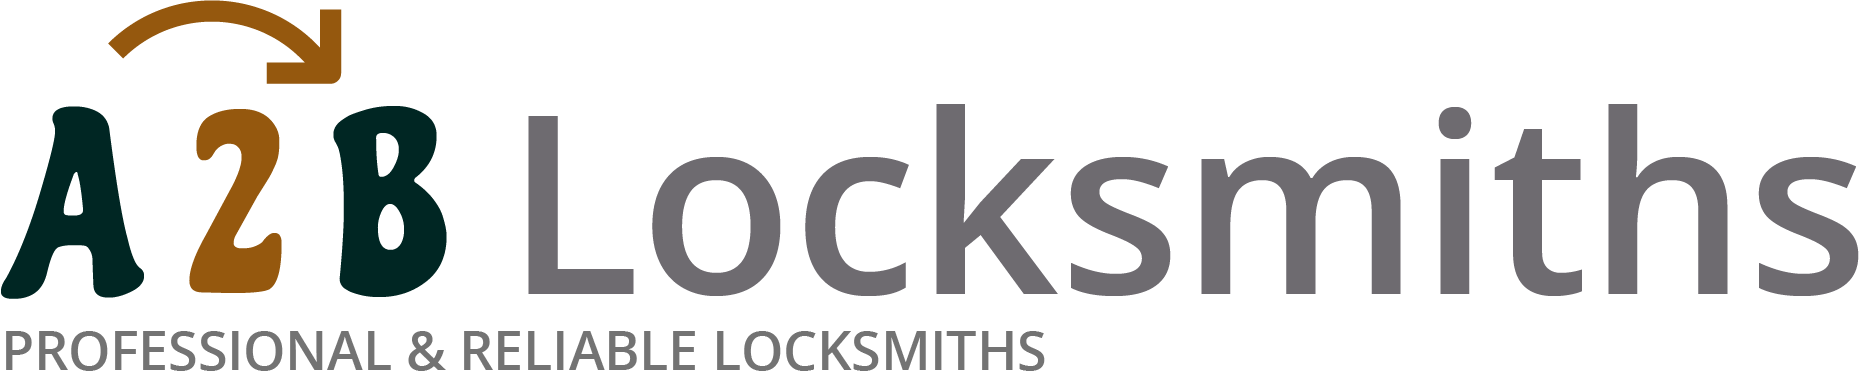 If you are locked out of house in Newbury, our 24/7 local emergency locksmith services can help you.